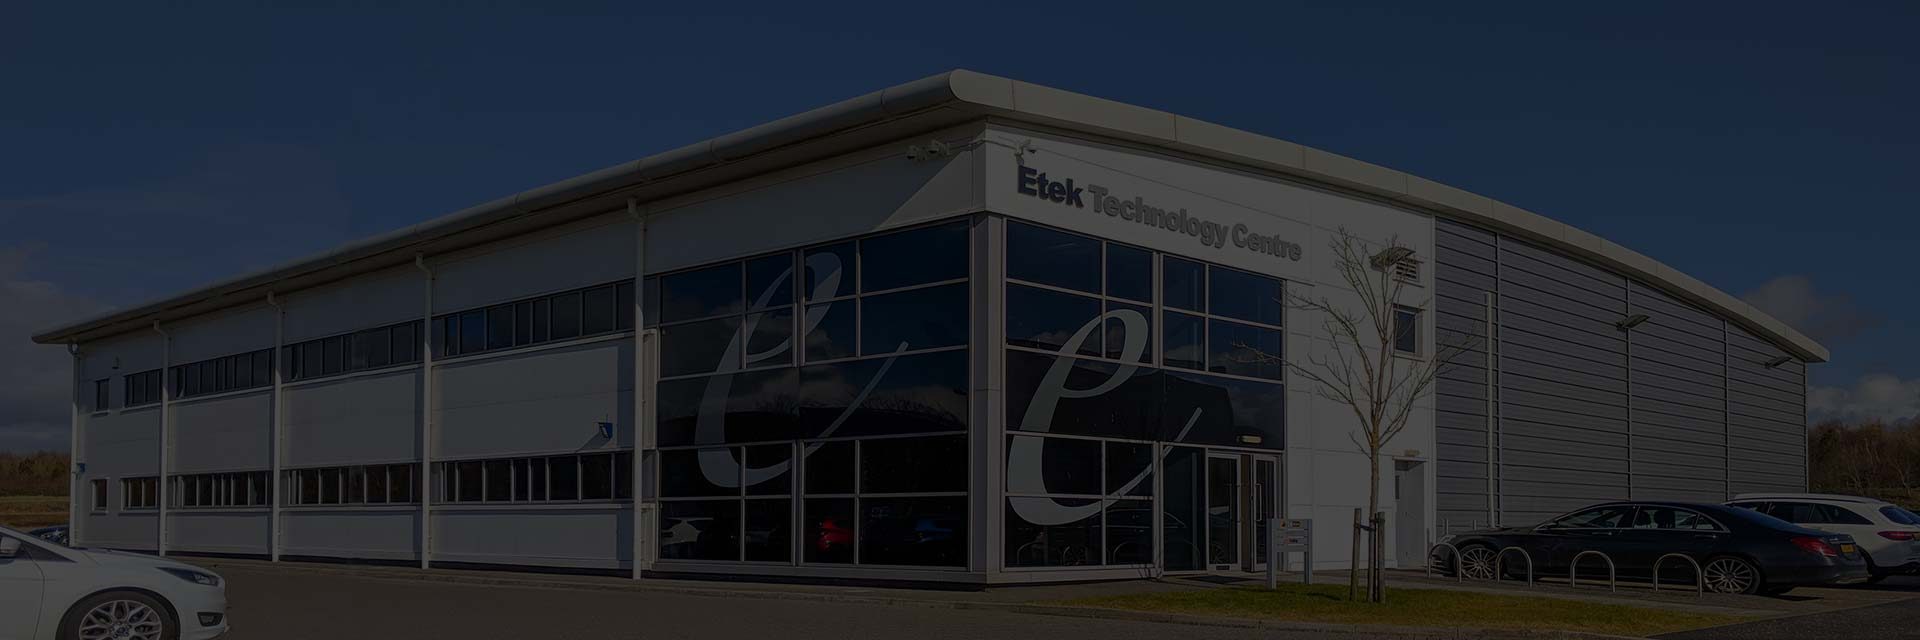 Etek Europe Technology Centre for Electronics Manufacturing Equipment